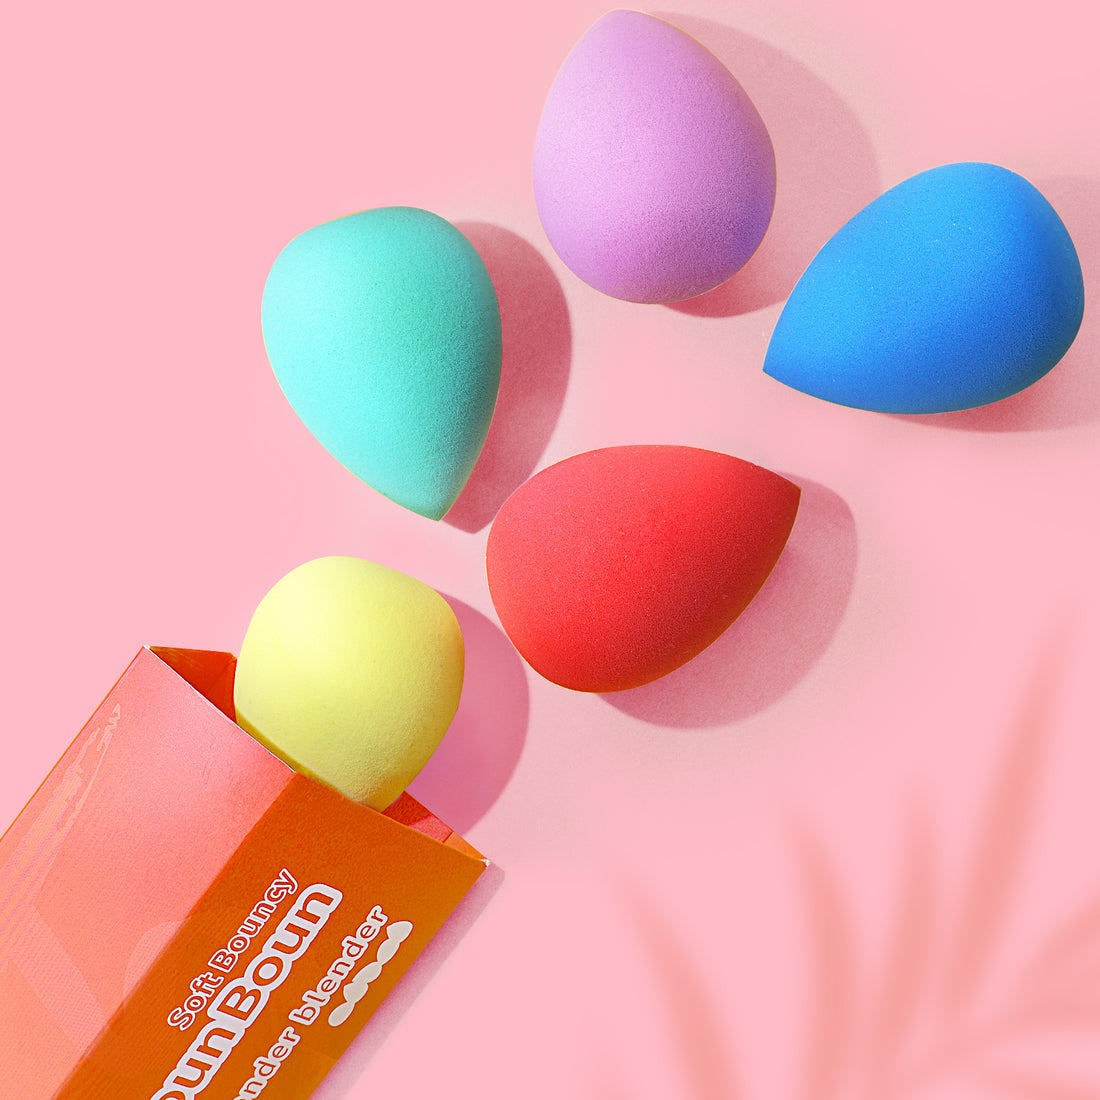 Valentine's Special: The Guide to Sweetheart Deals on Makeup Sponges!